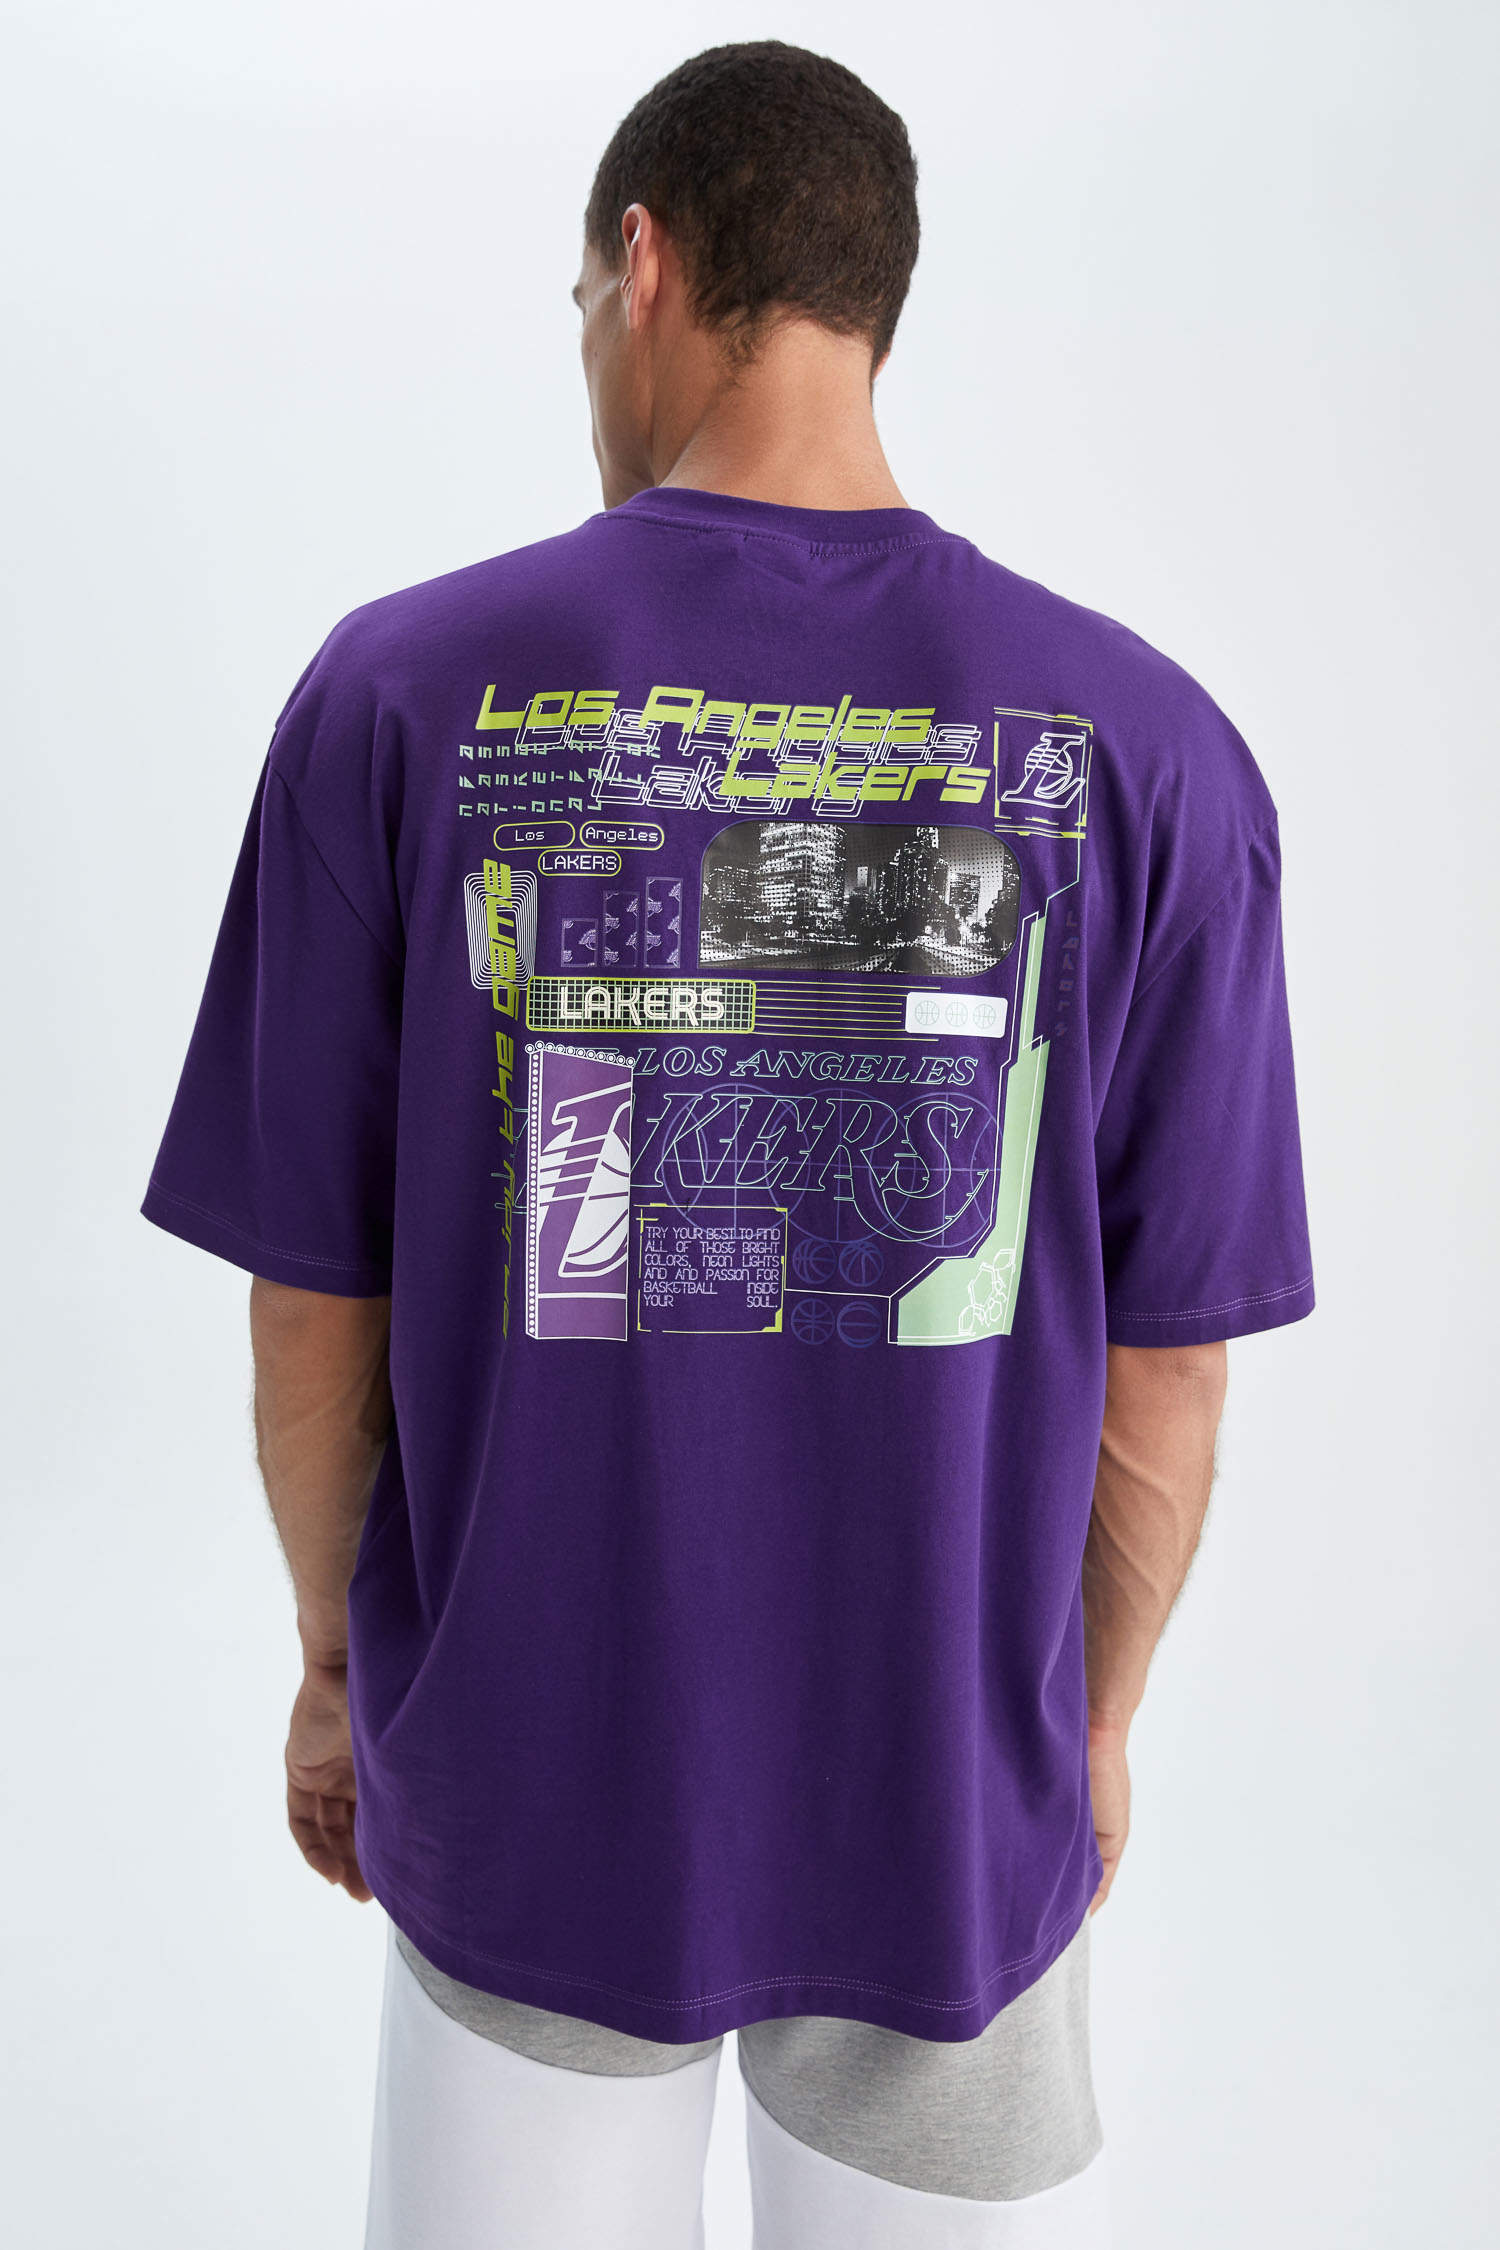 Lakers Bright Lights Tee